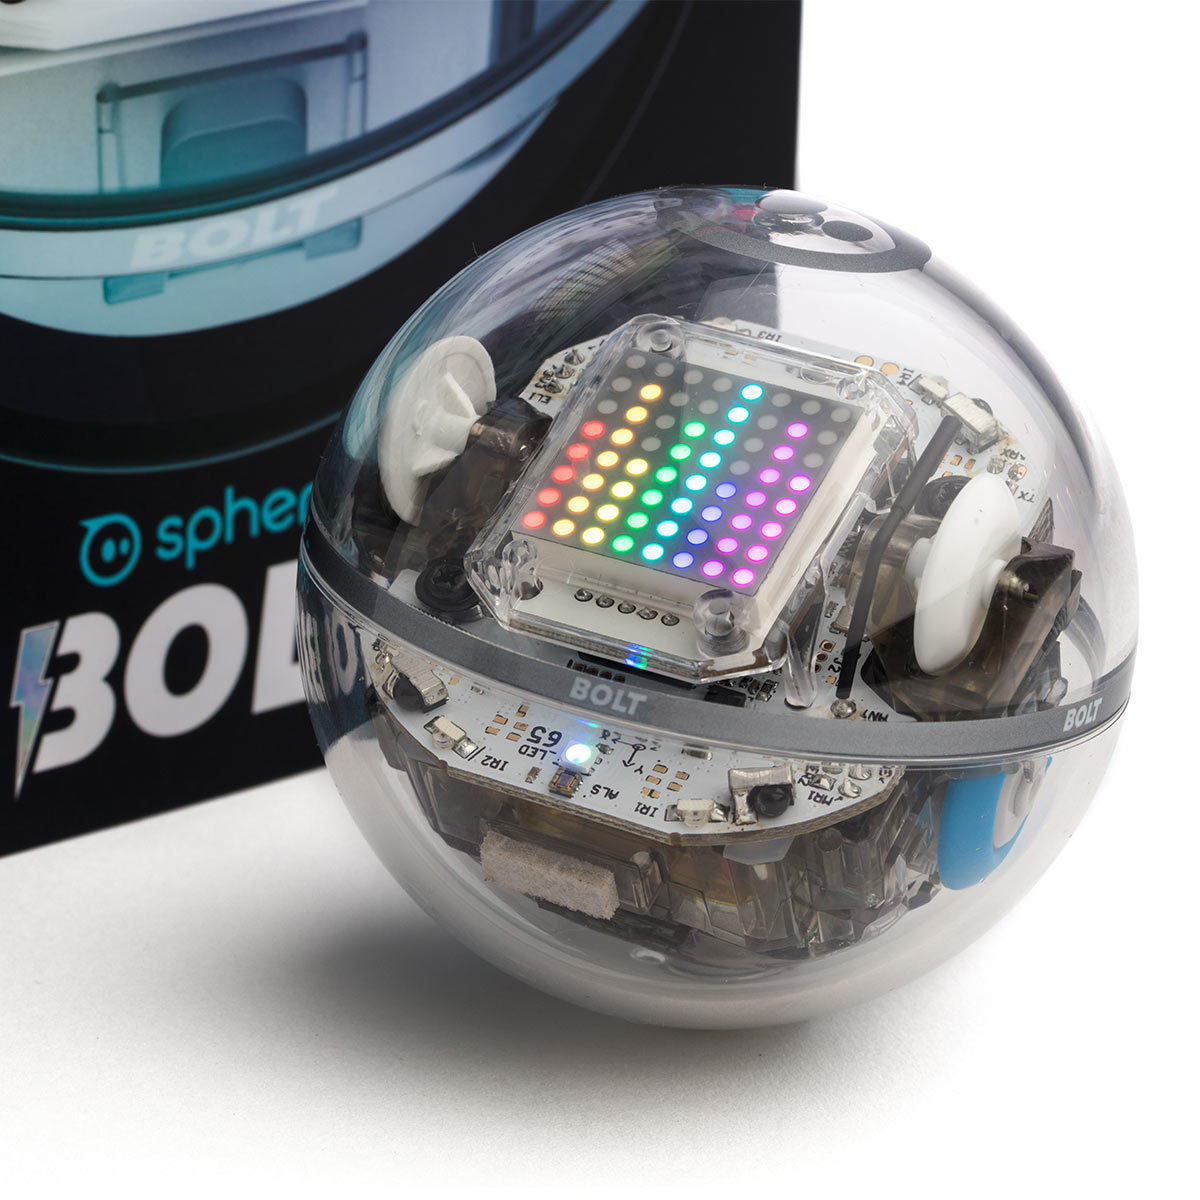 Front image of the sphero BOLT electronic interactive toy robot